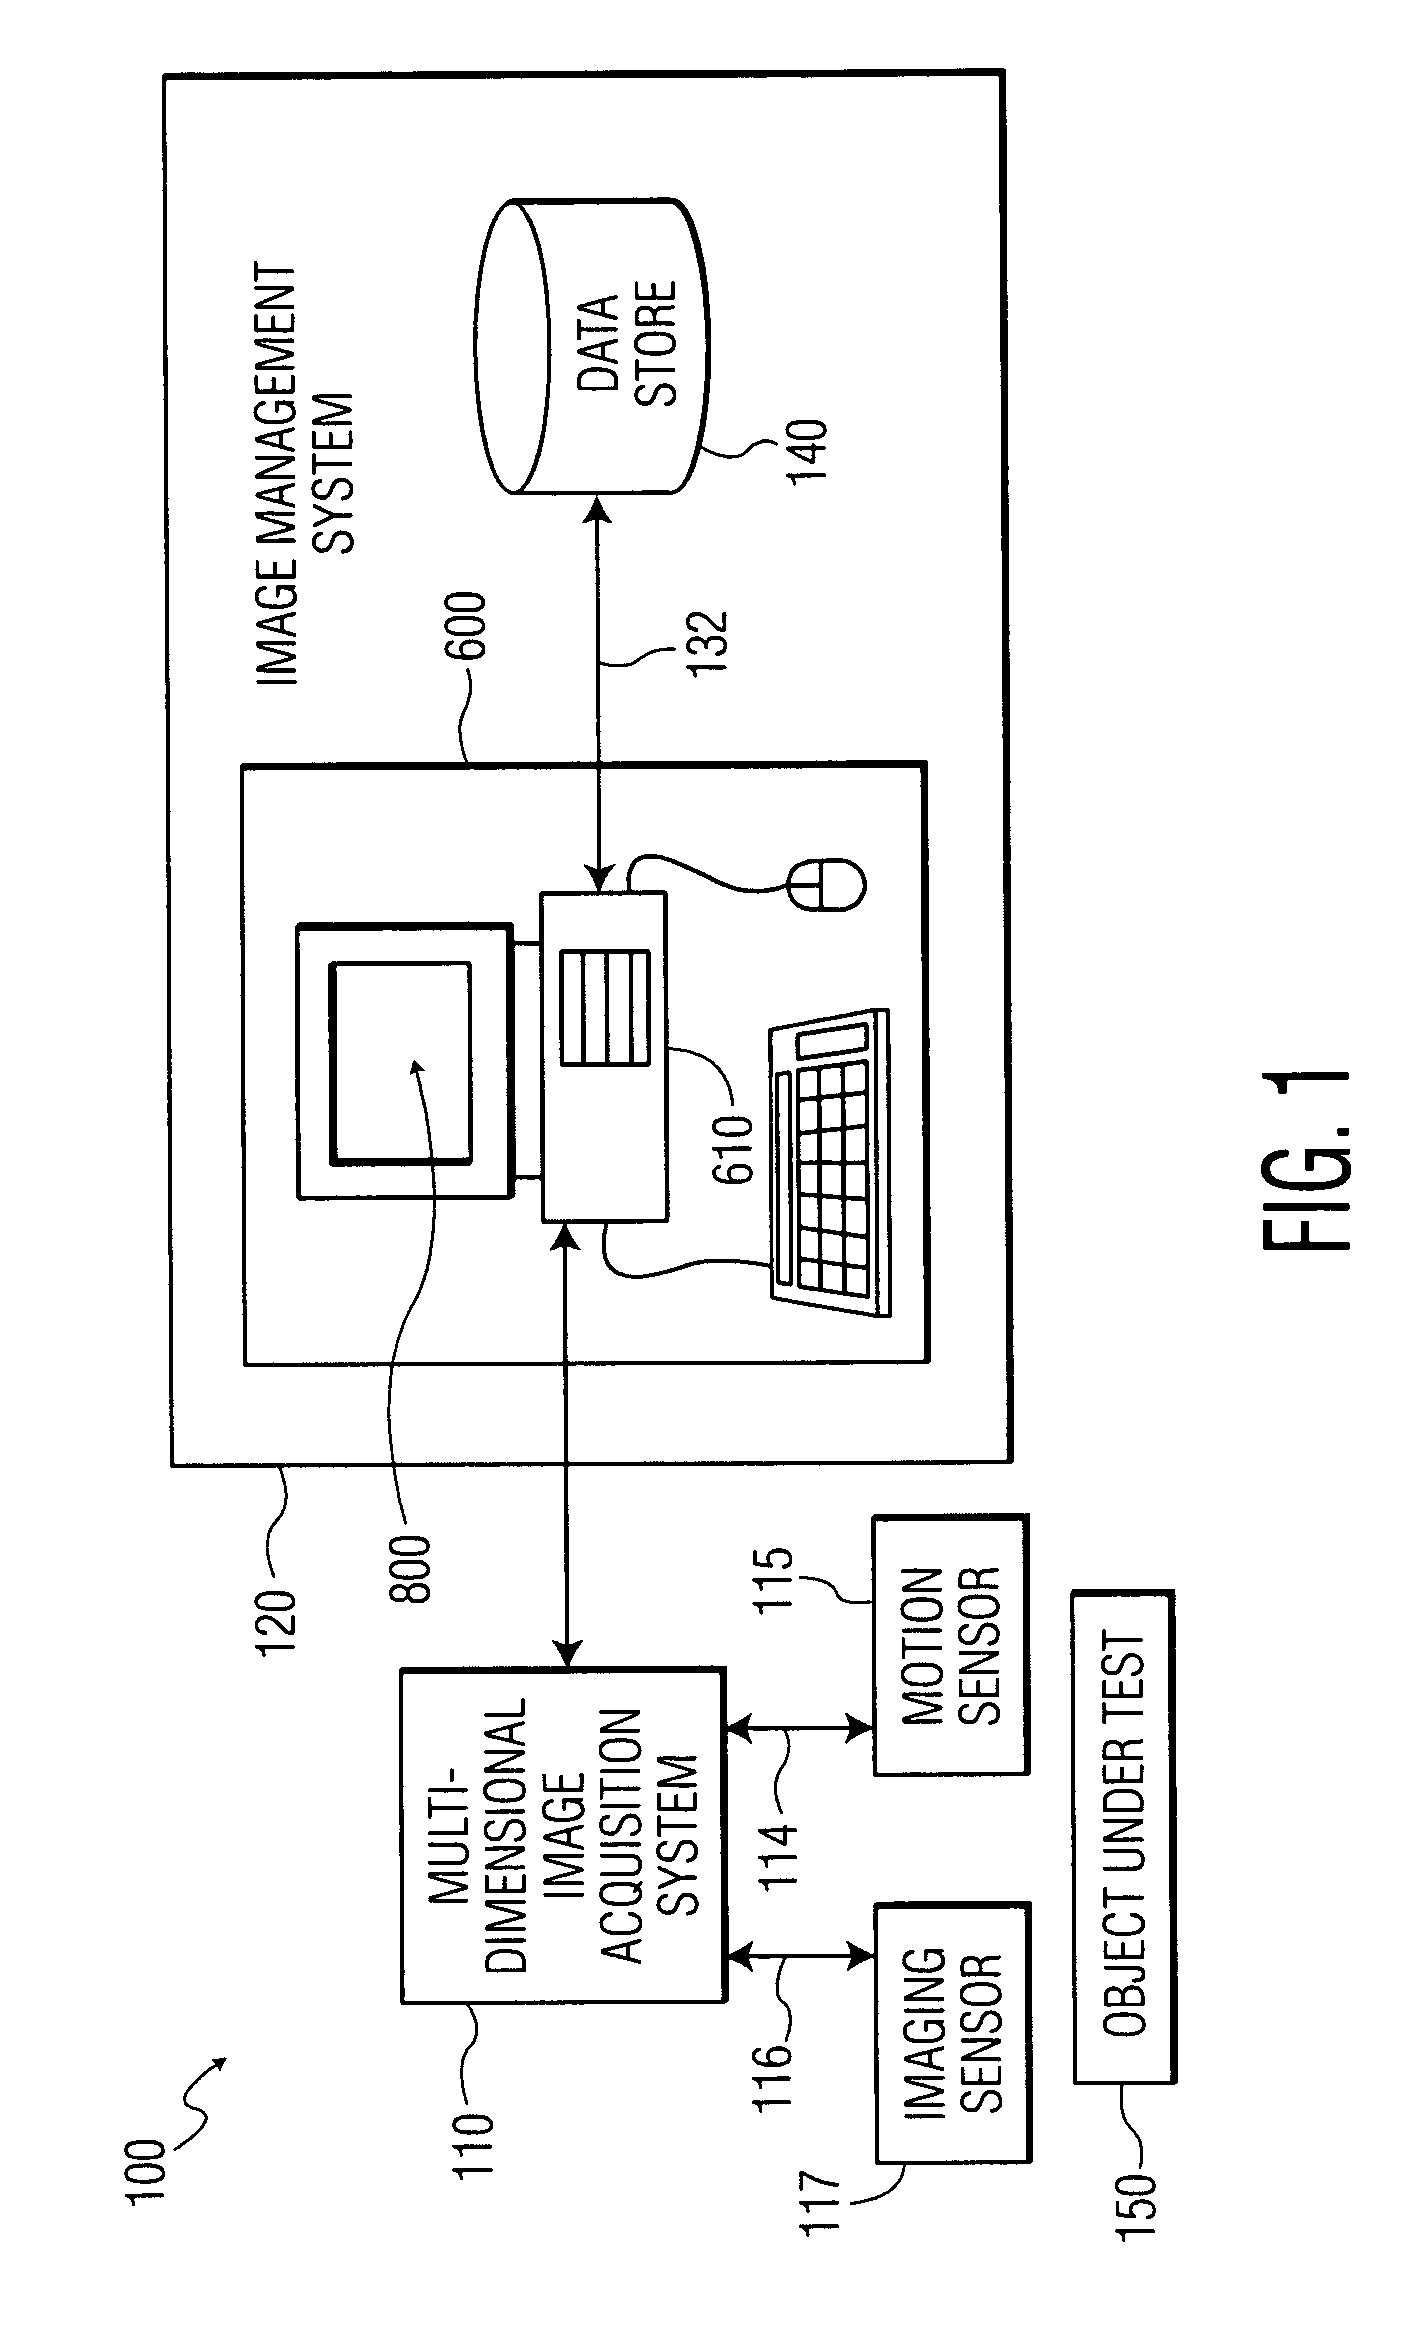 System and method for improved multiple-dimension image displays